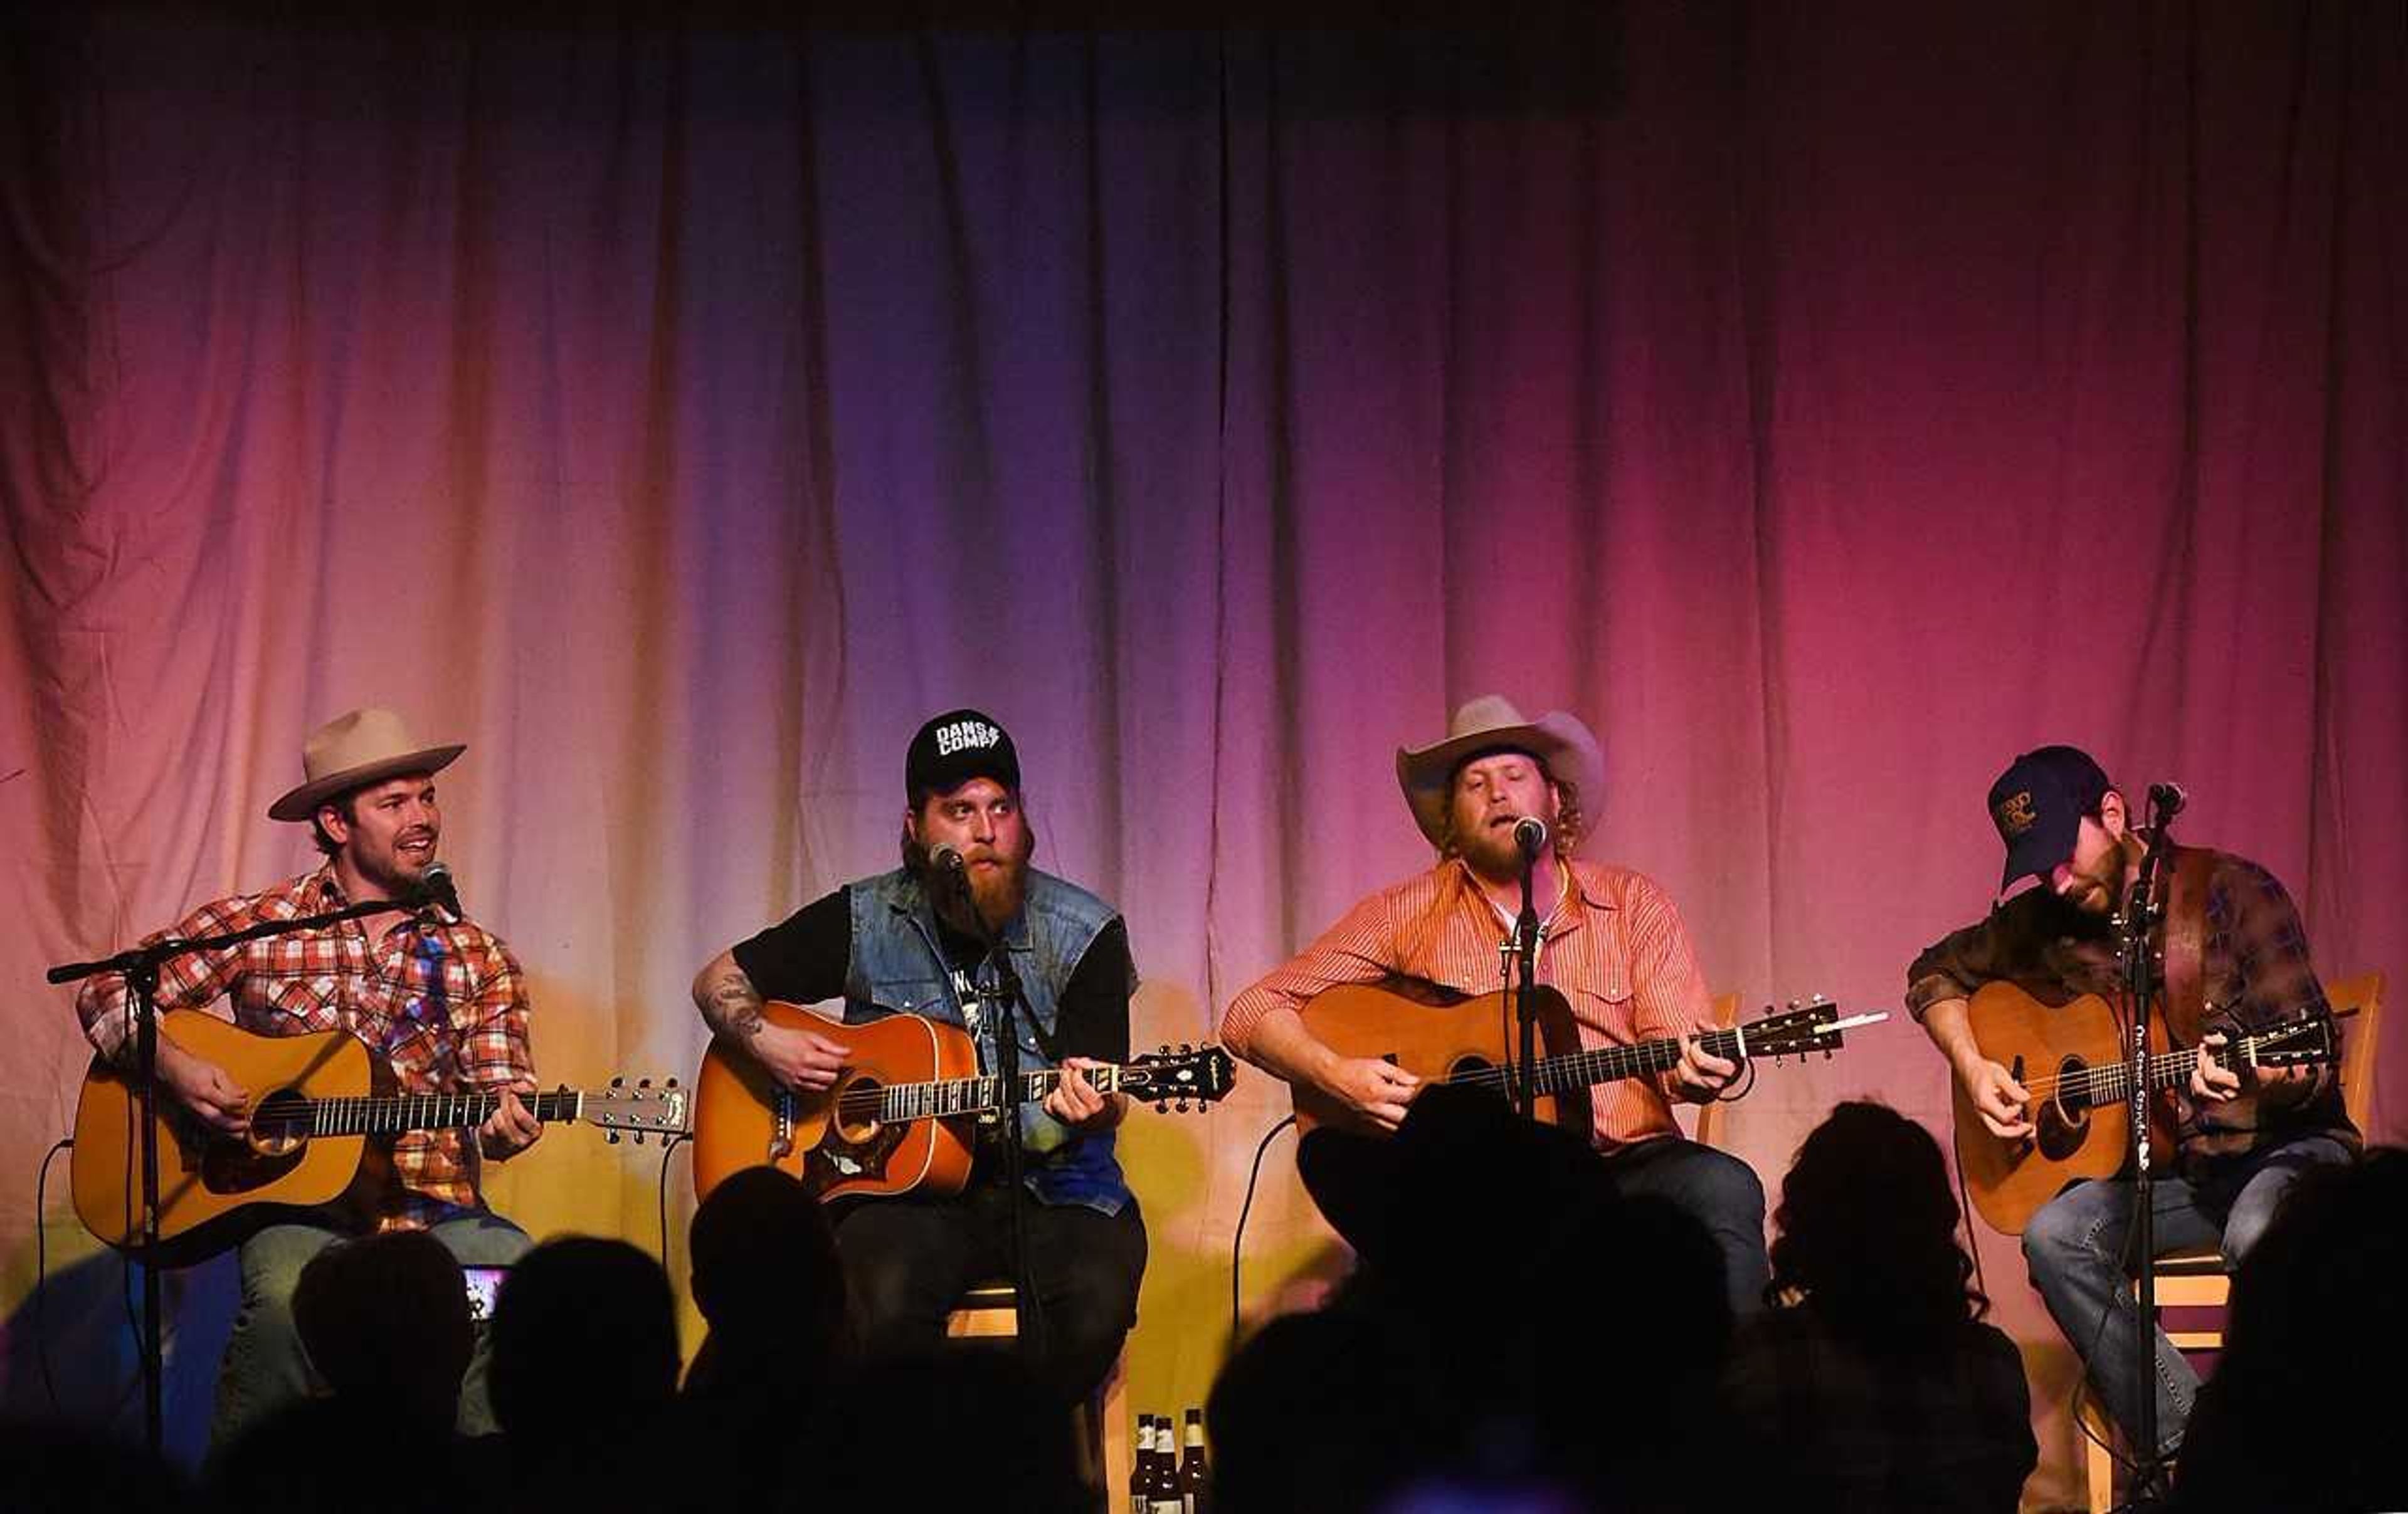 Songwriters from right to left, Adam Hellman, Kasey Lee Rodgers, John D. Hale and Evan Webb, at Sit Down and Shut Up (A Night of Songs) at Port Cape Yacht Club.